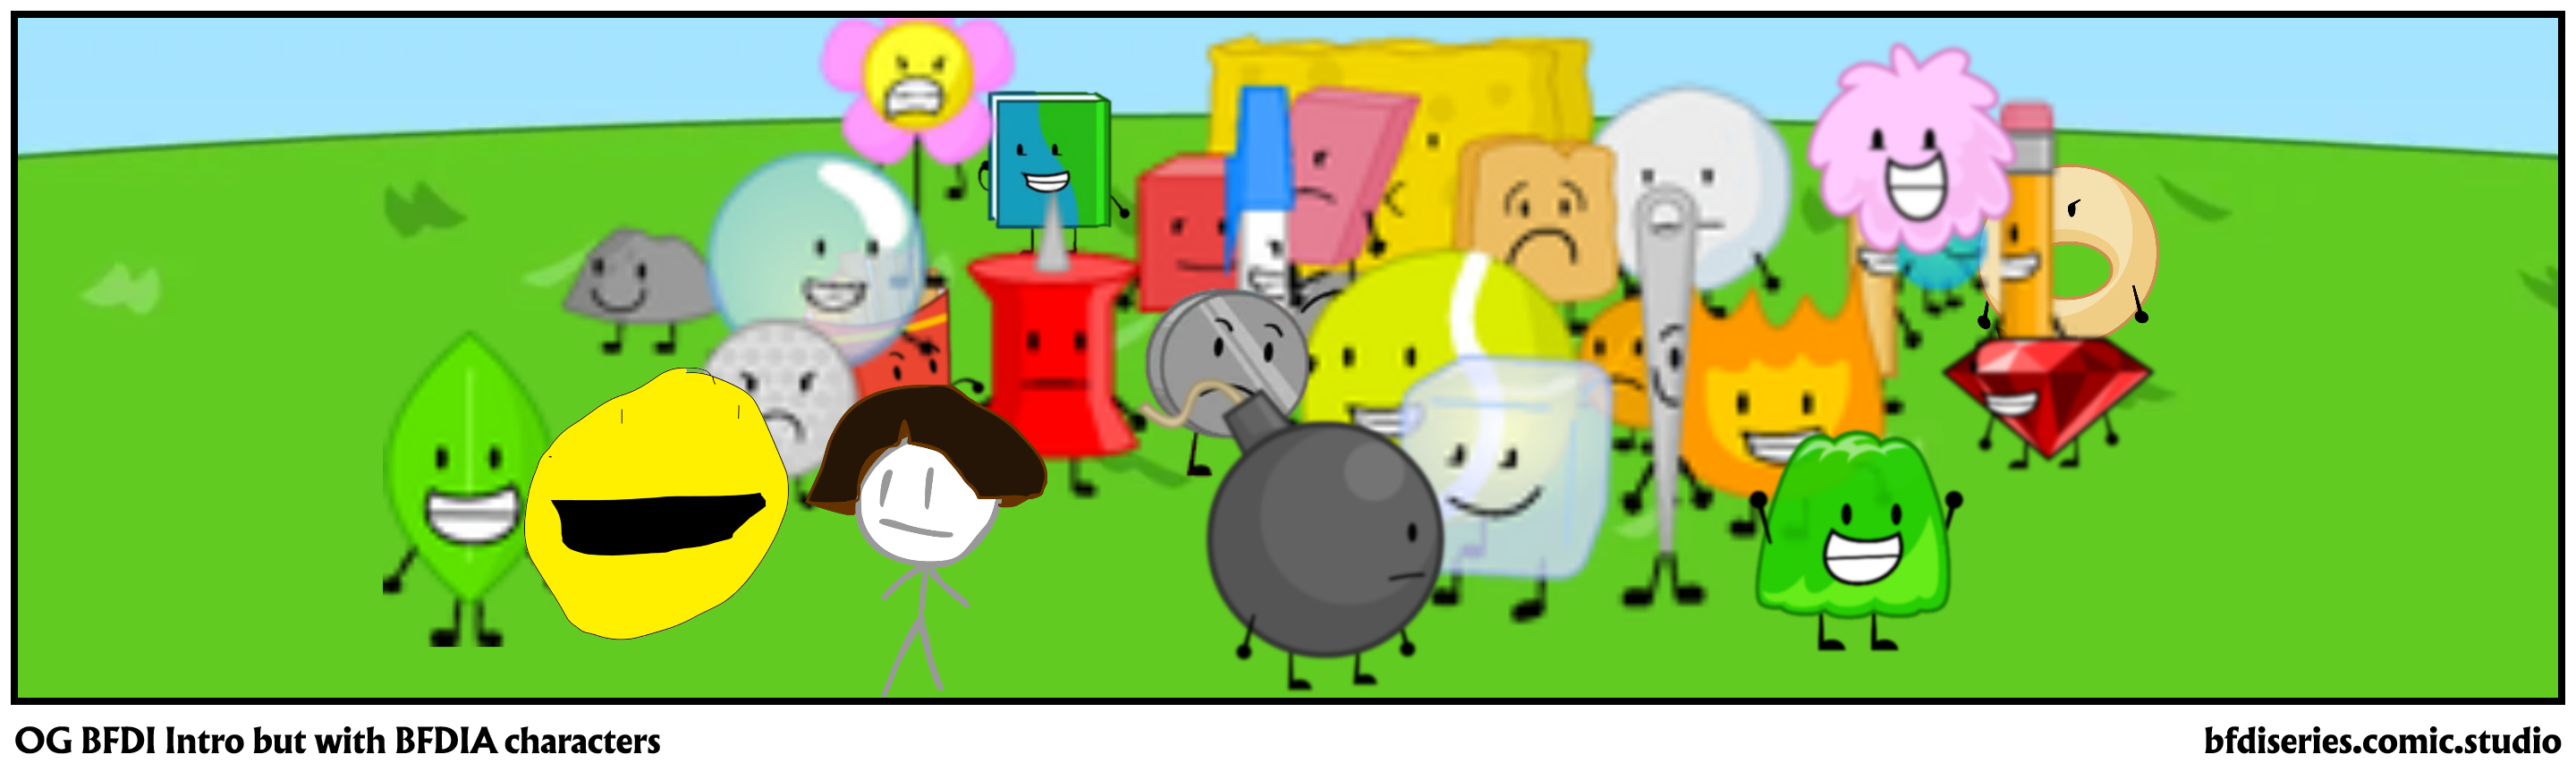 OG BFDI Intro but with BFDIA characters